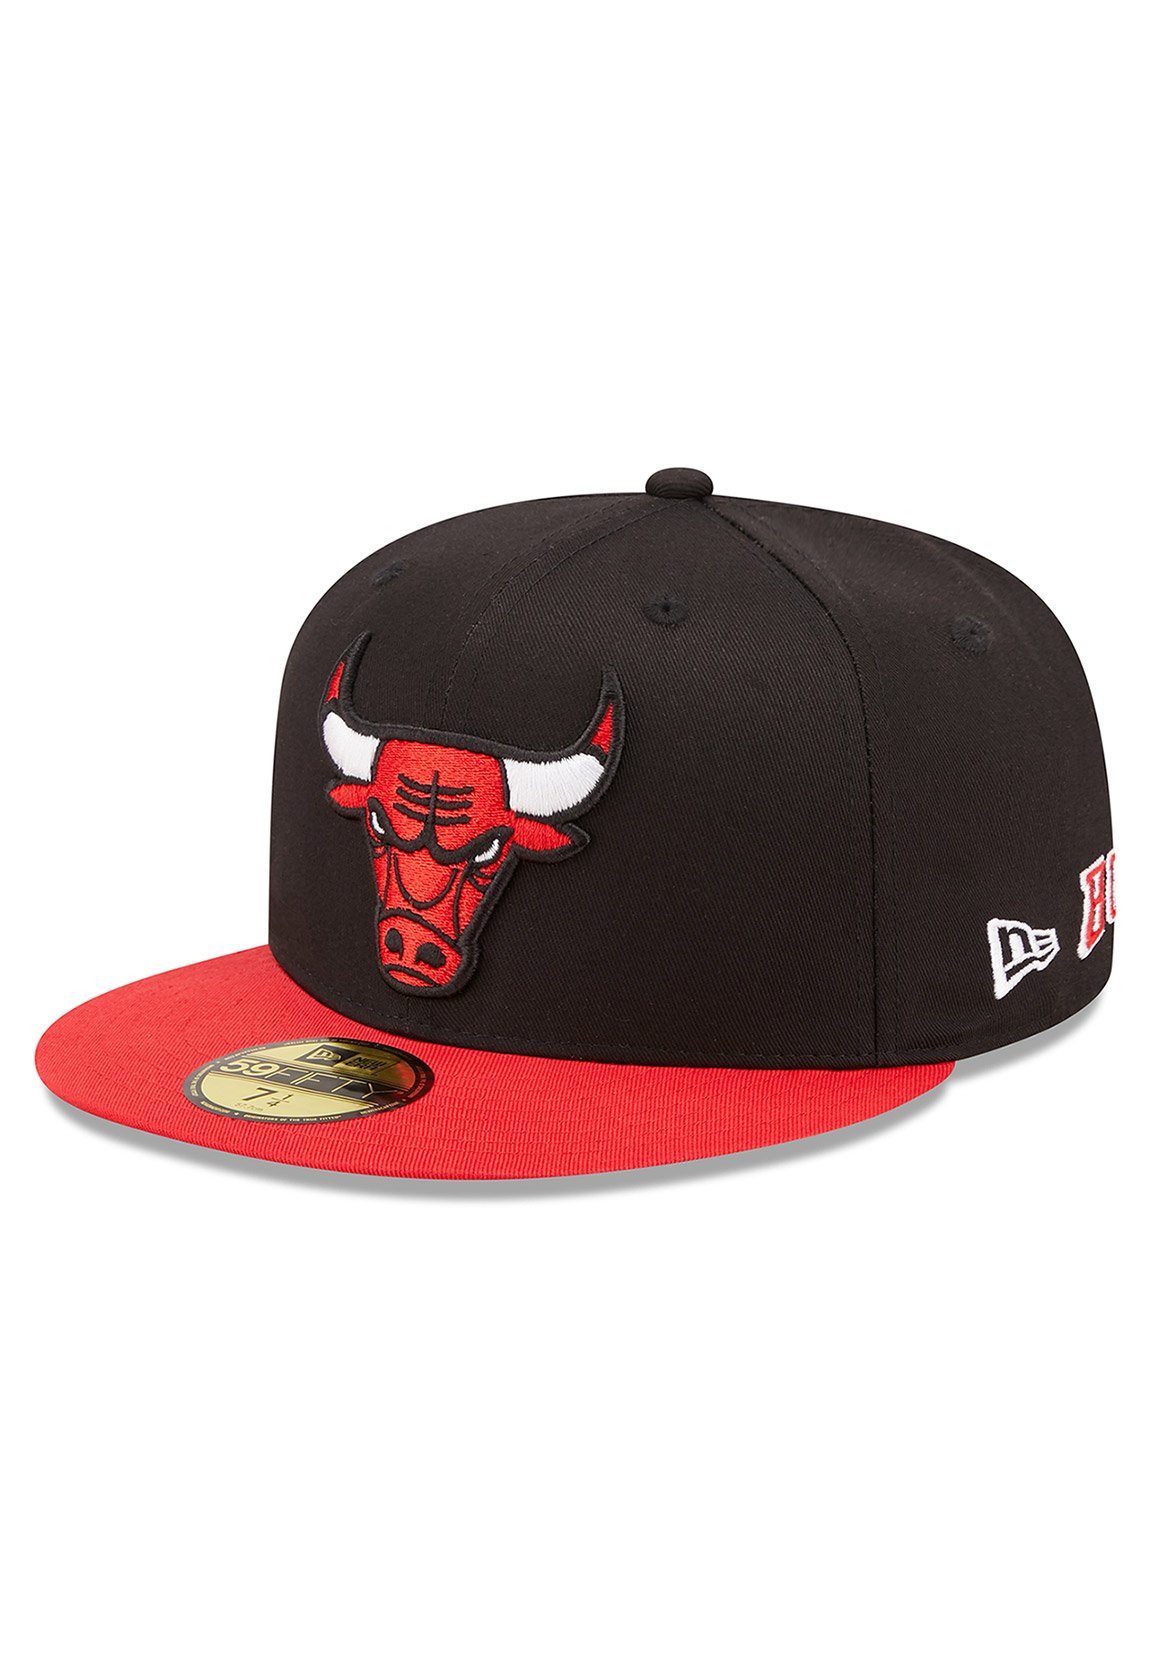 New Era Fitted Cap New Team City Patch 59Fifty Cap CHICAGO BULLS Schwarz Rot